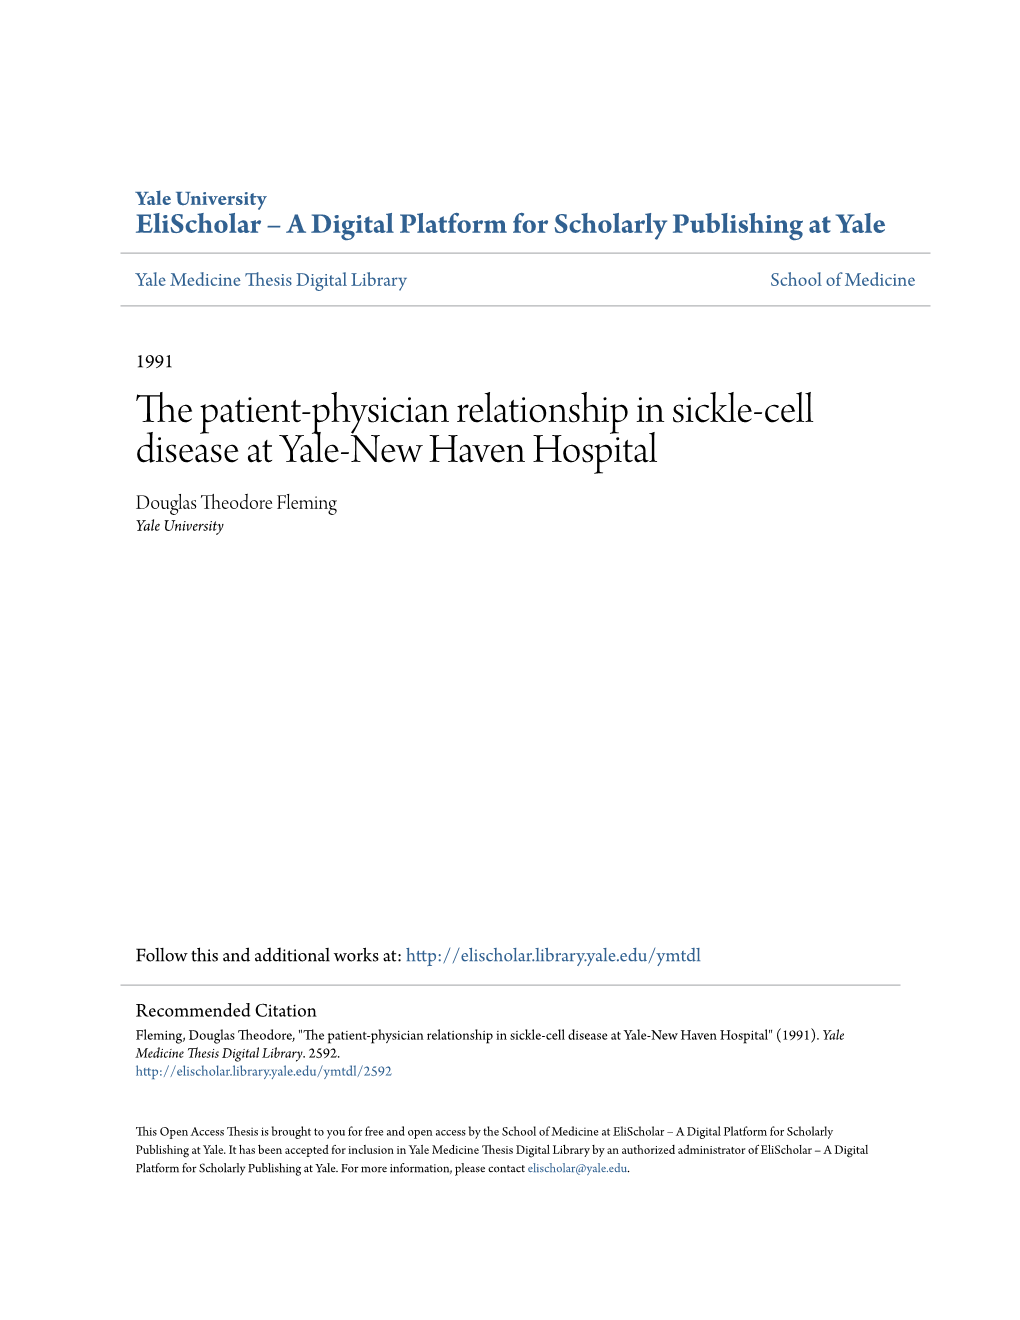 The Patient-Physician Relationship in Sickle-Cell Disease at Yale-New Haven Hospital